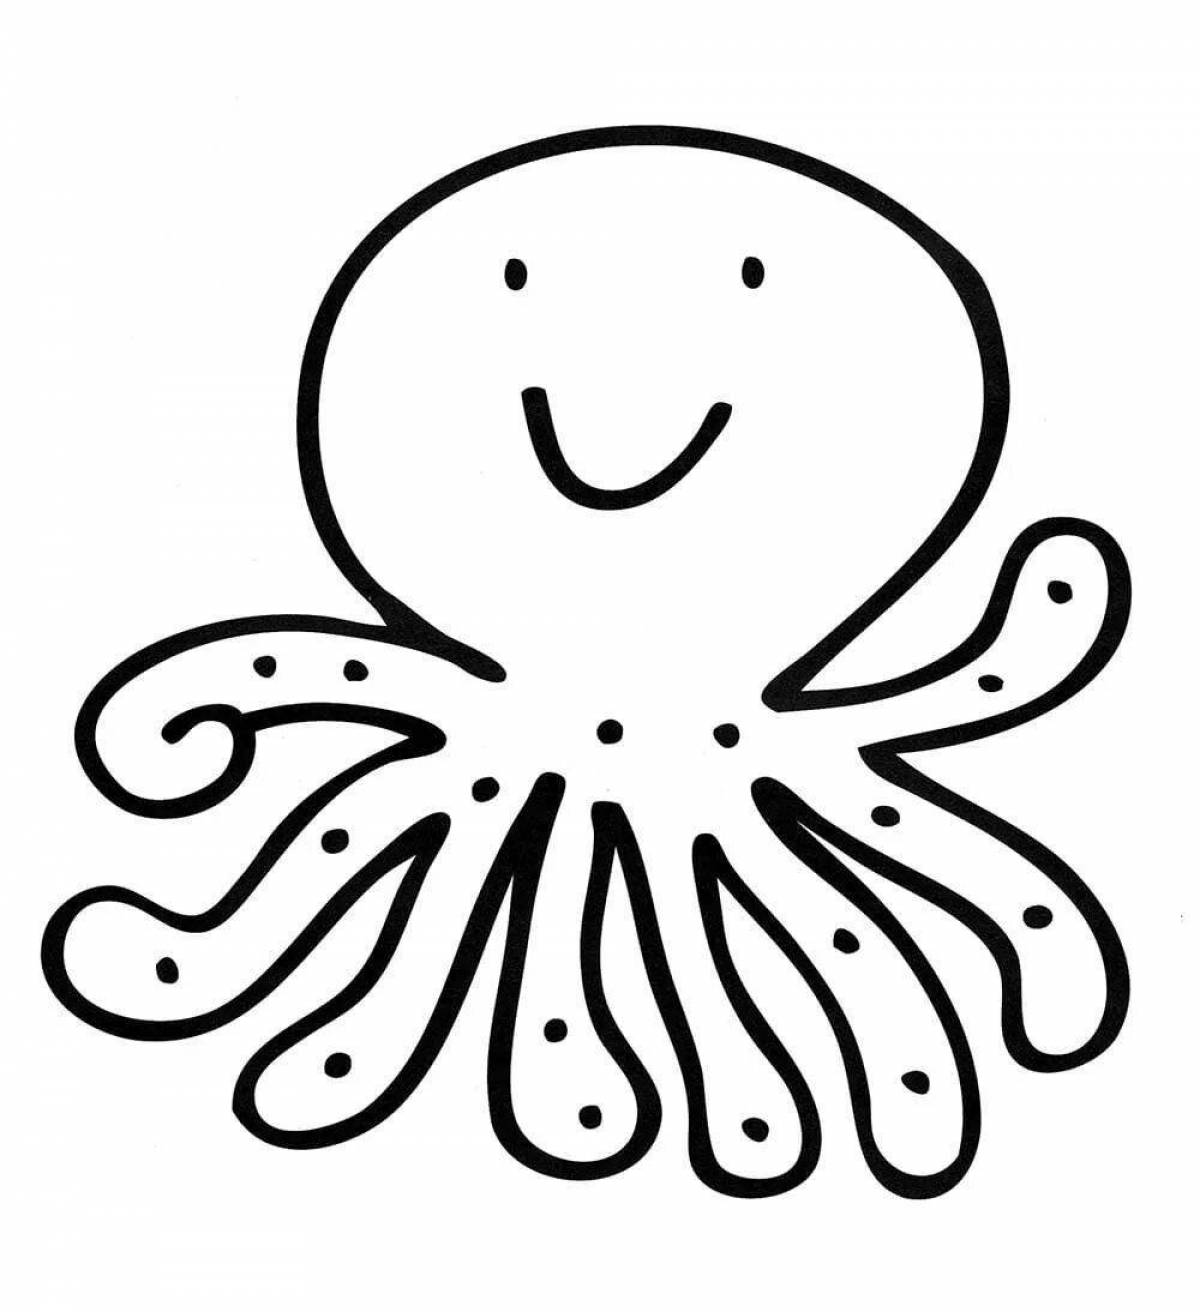 Charming octopus coloring book for 3-4 year olds